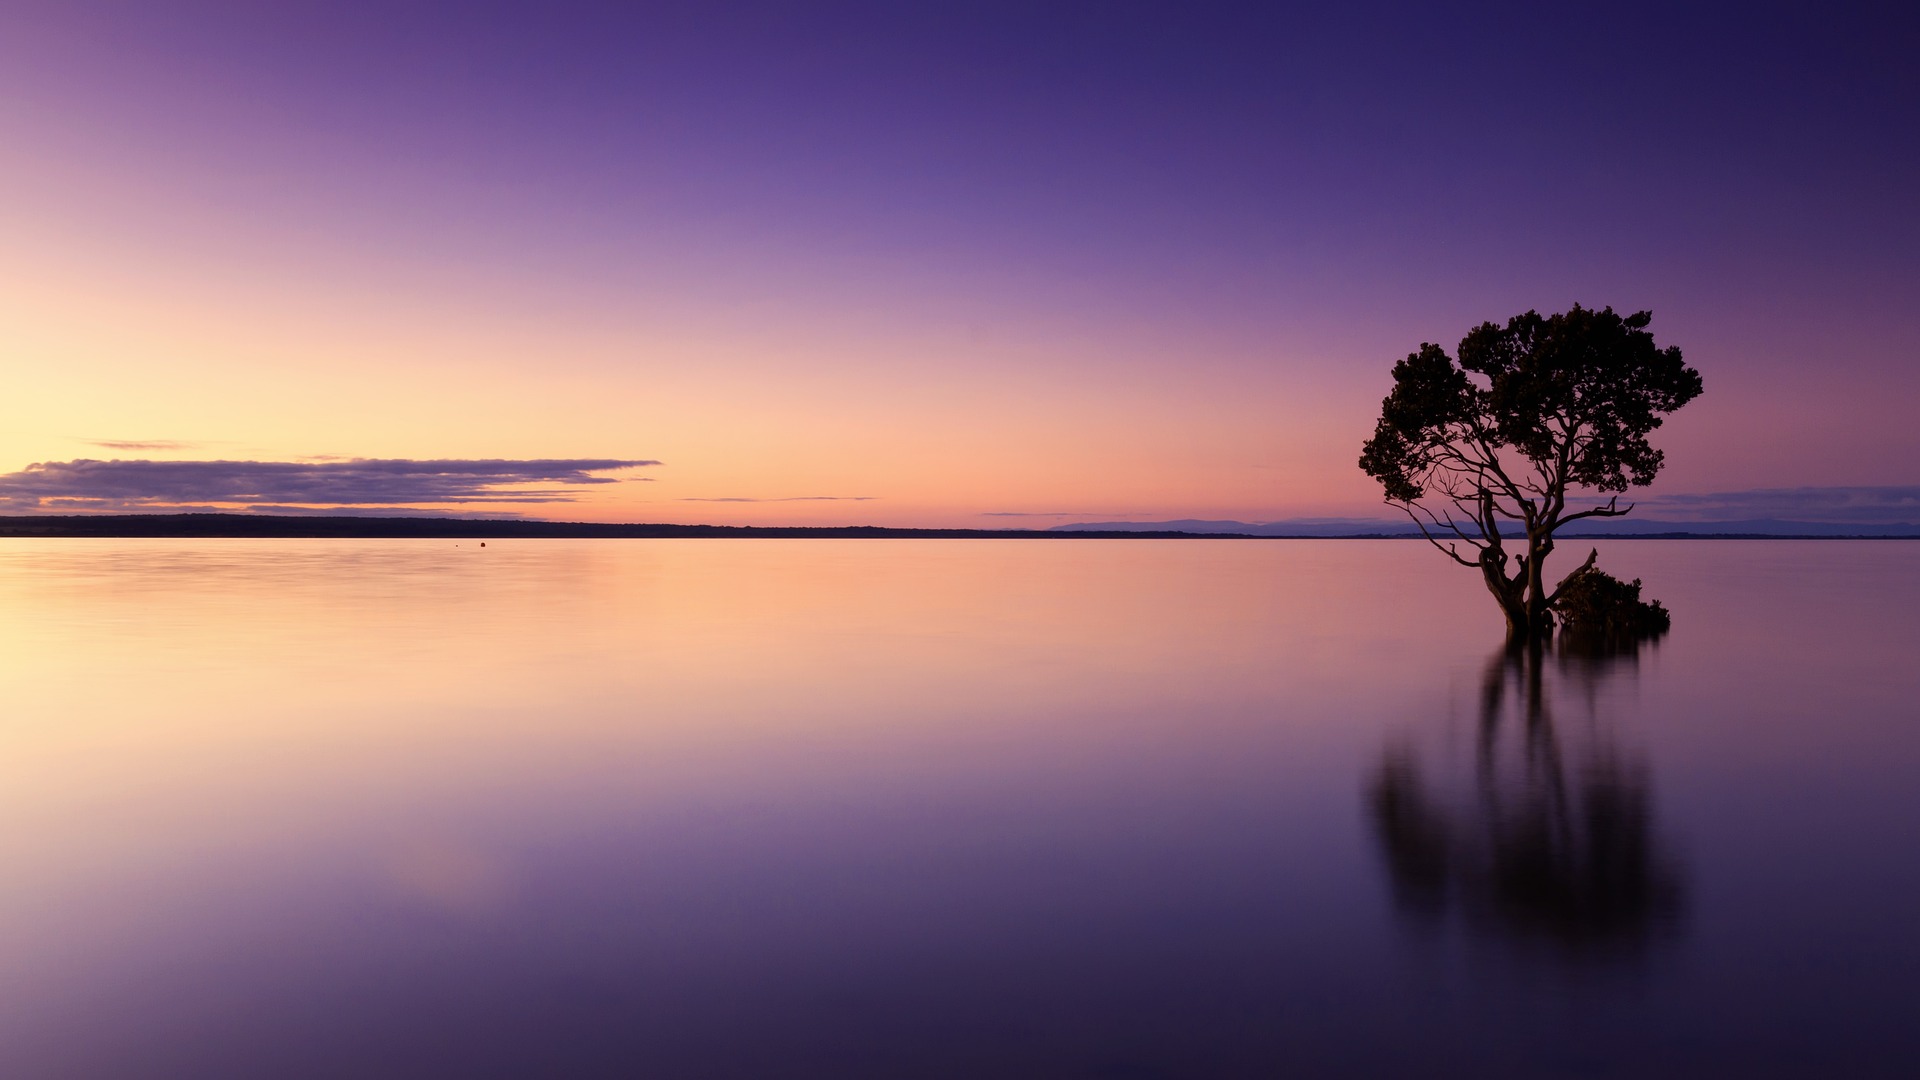 Sunset on the sea with a tree in the water